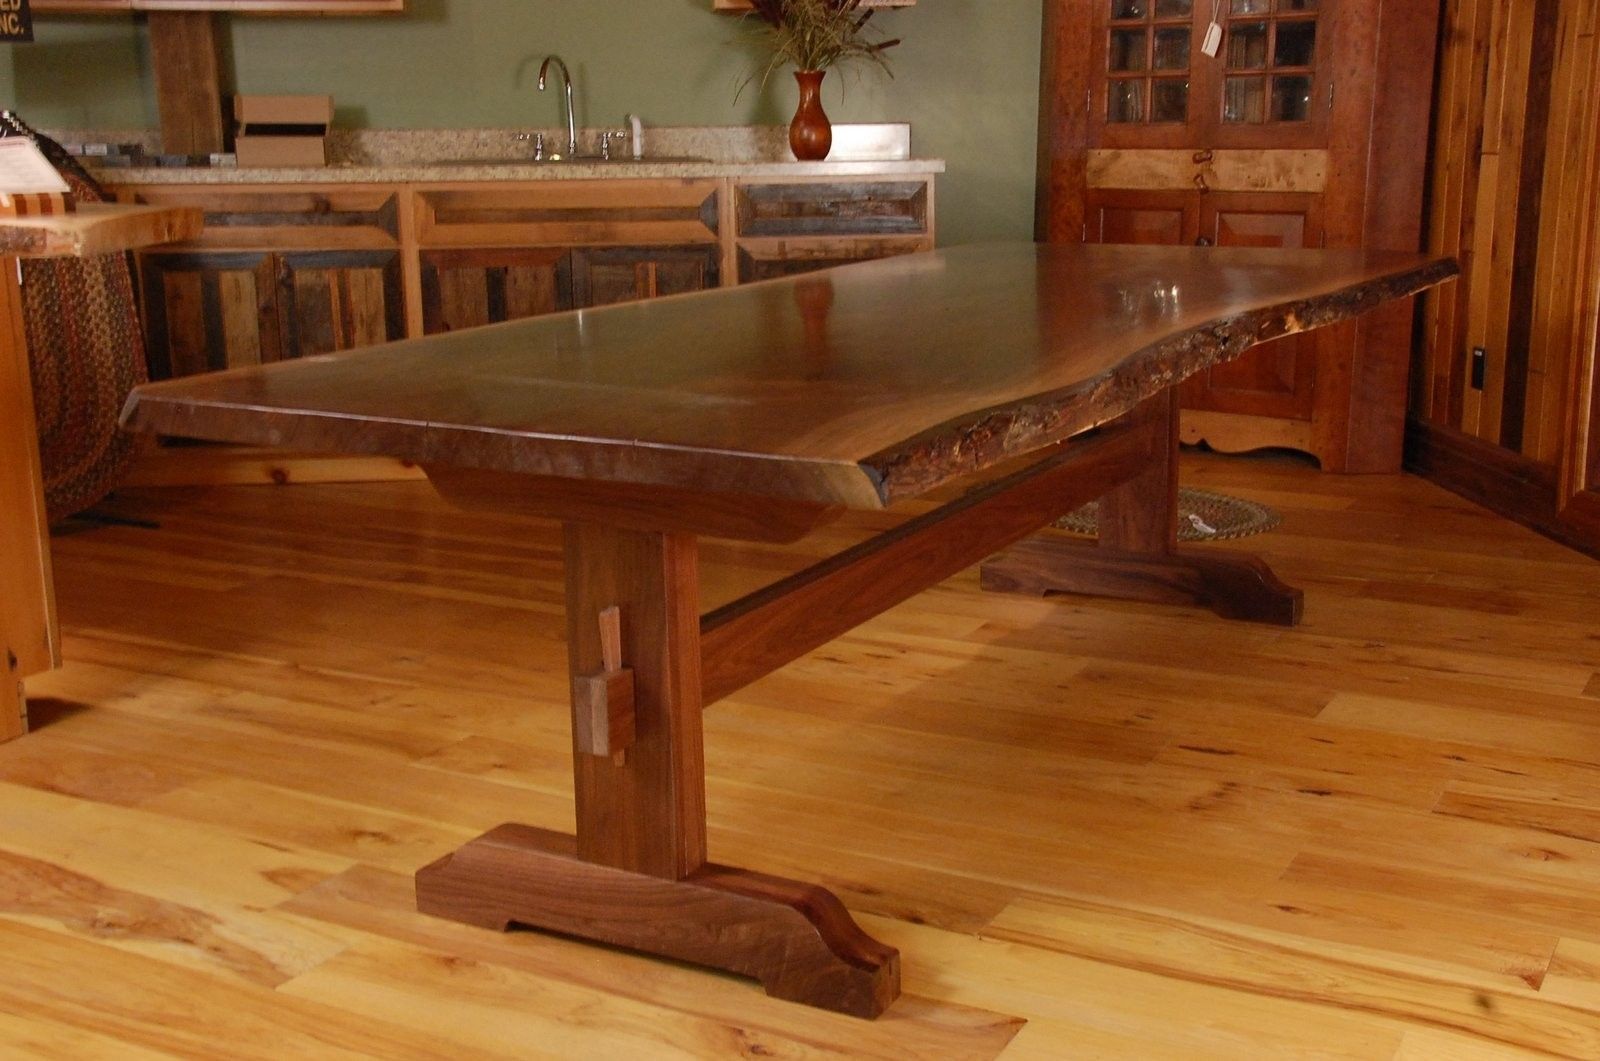 Hand Crafted Live Edge Walnut Slab Trestle Dining Table by Corey Morgan